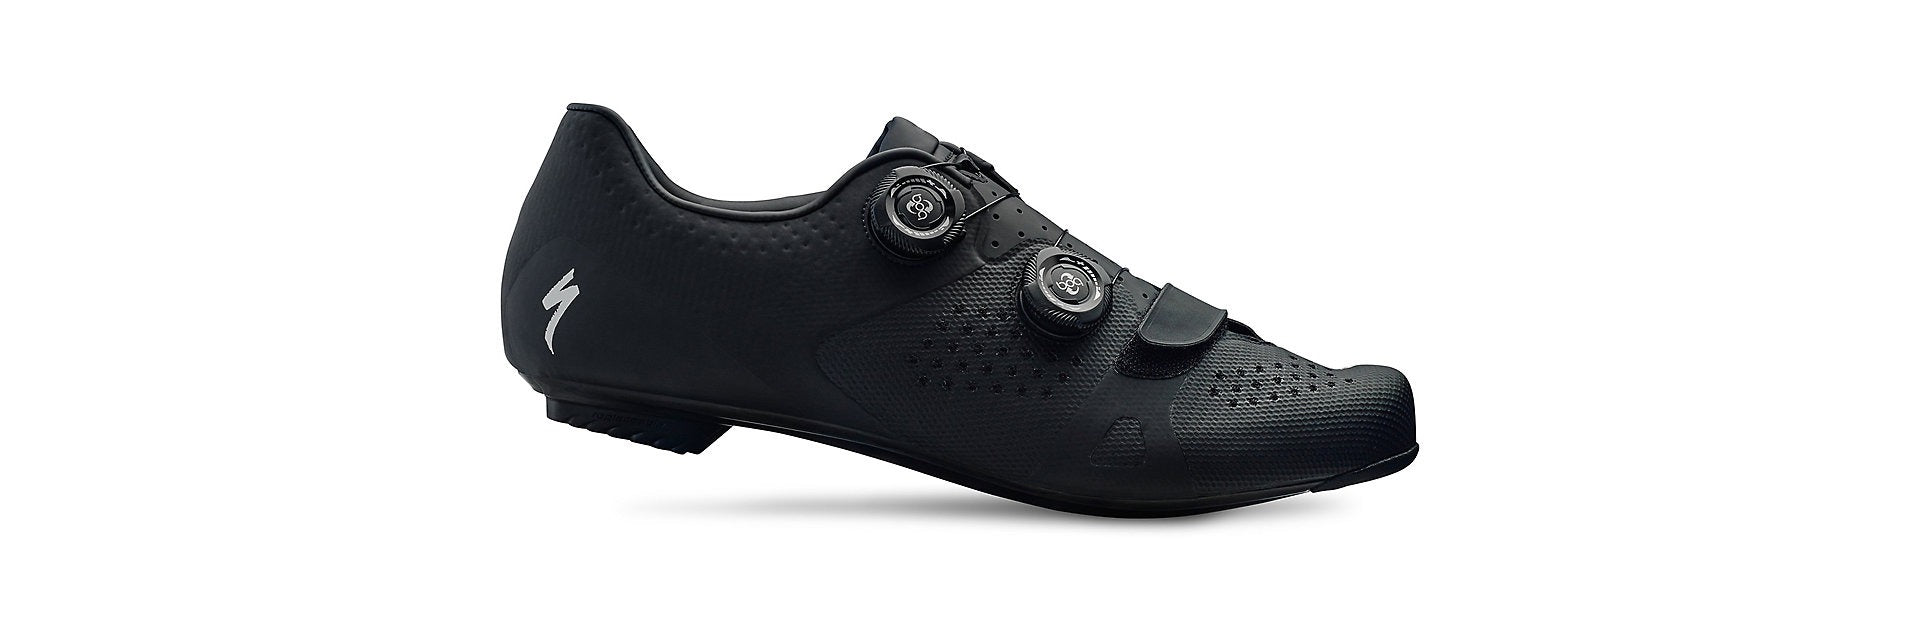 Specialized Torch 3.0 Road Cycling Bike Shoe